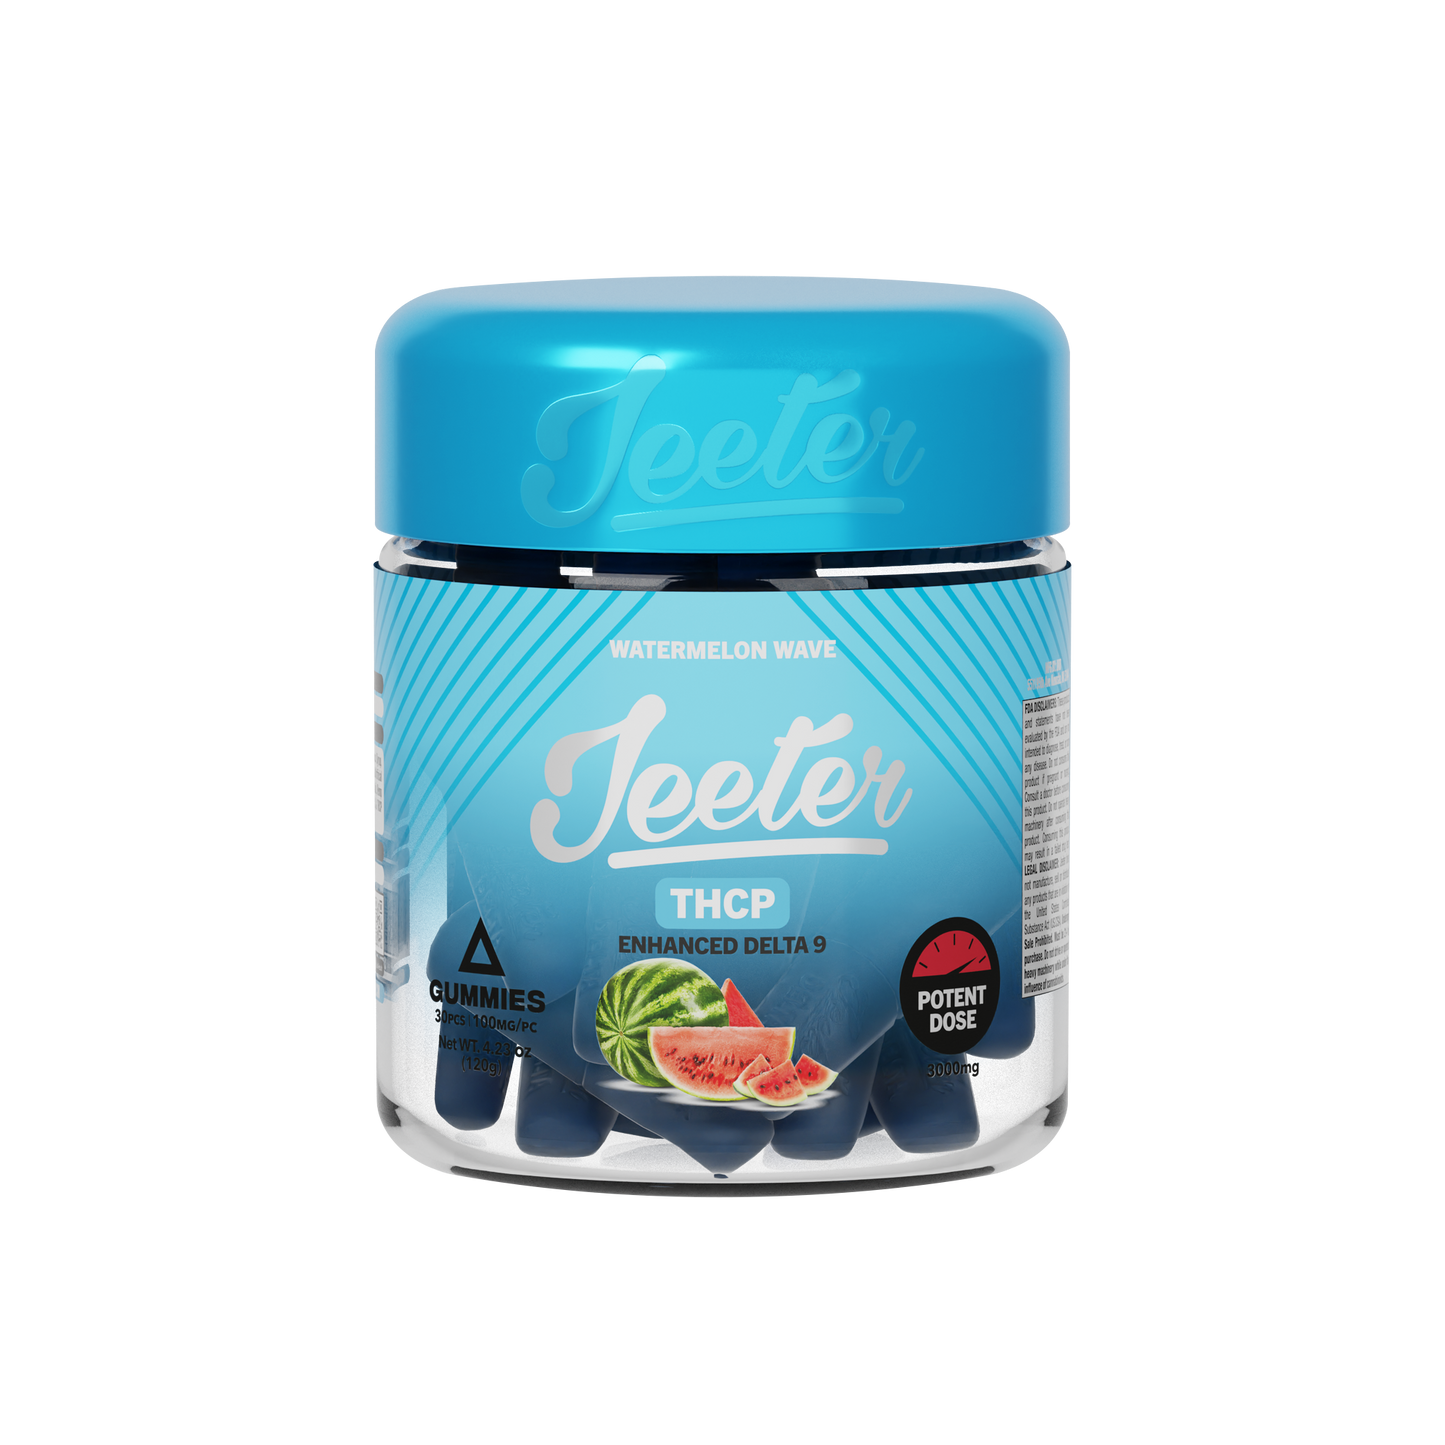 Jeeter - THCP - Potent Dose Gummies - Watermelon Wave - 3000MG - Burning Daily